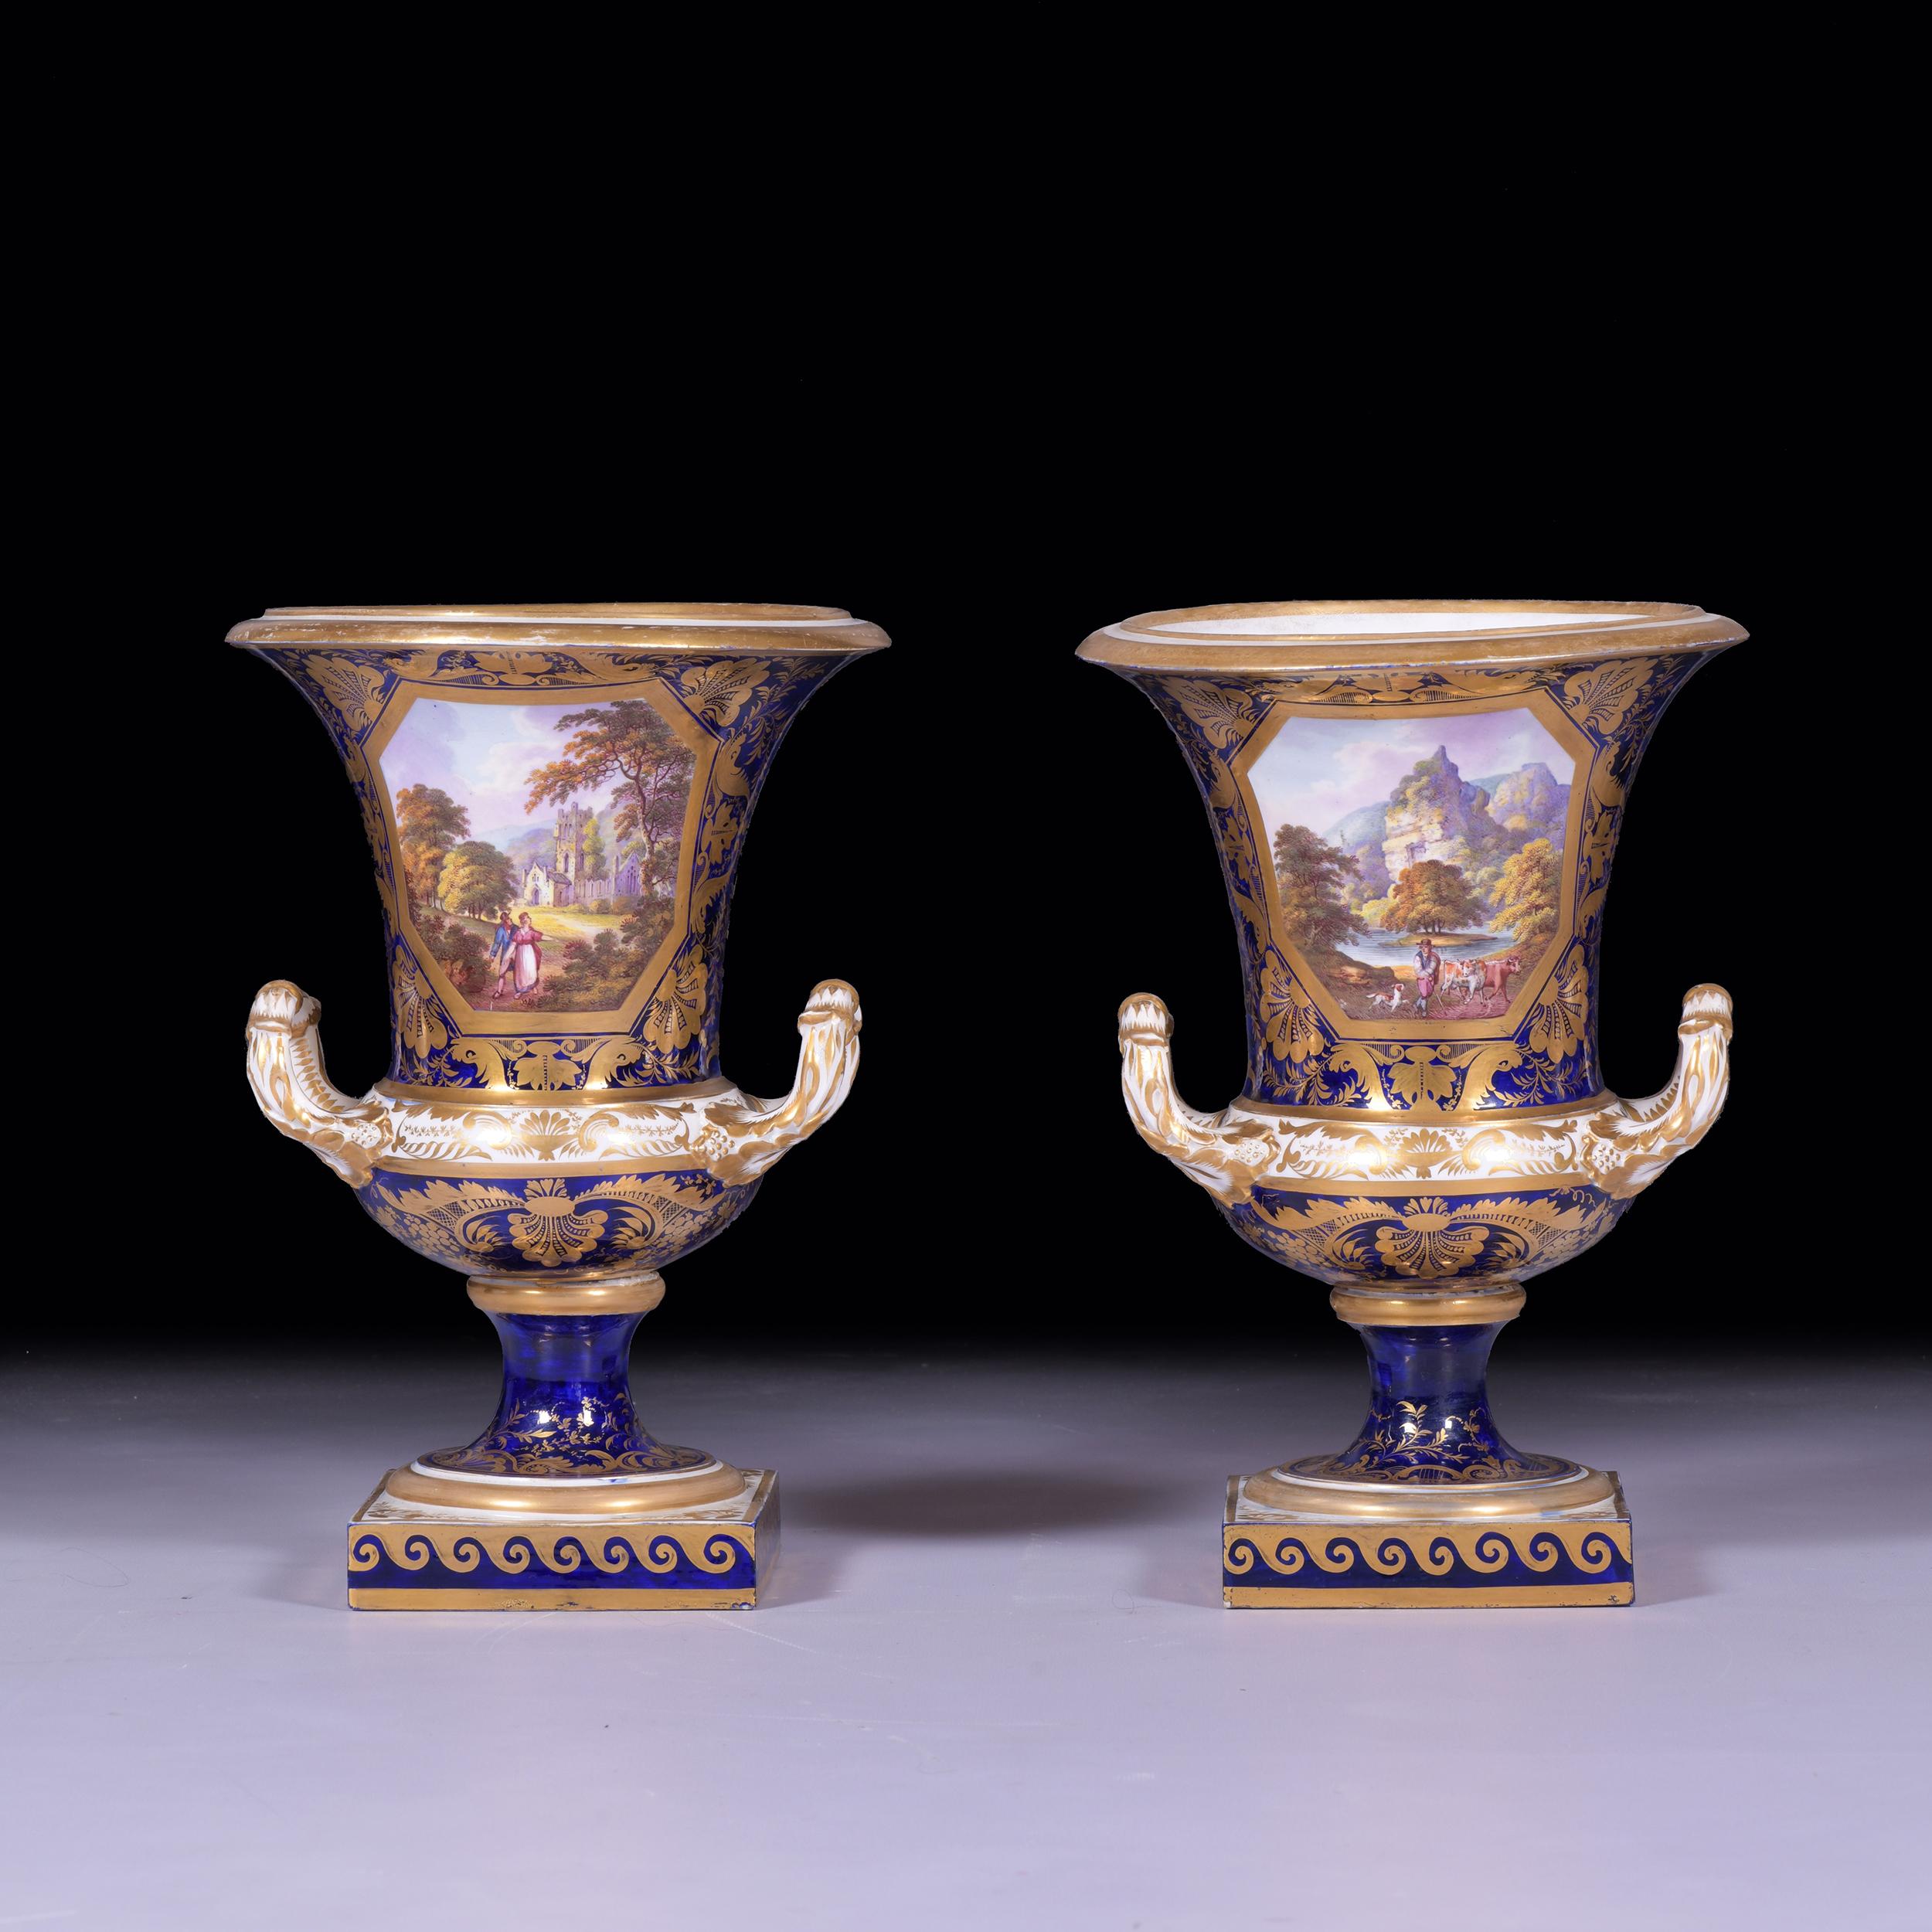 A stunning pair of early 19th century cobalt - blue vases by Crown Derby, each painted with a bucolic scene within a gilt cartouche on a blue ground, one inscribed: View in Scotland, the other inscibed: On the river Dove, Derbyshire.

Royal Crown